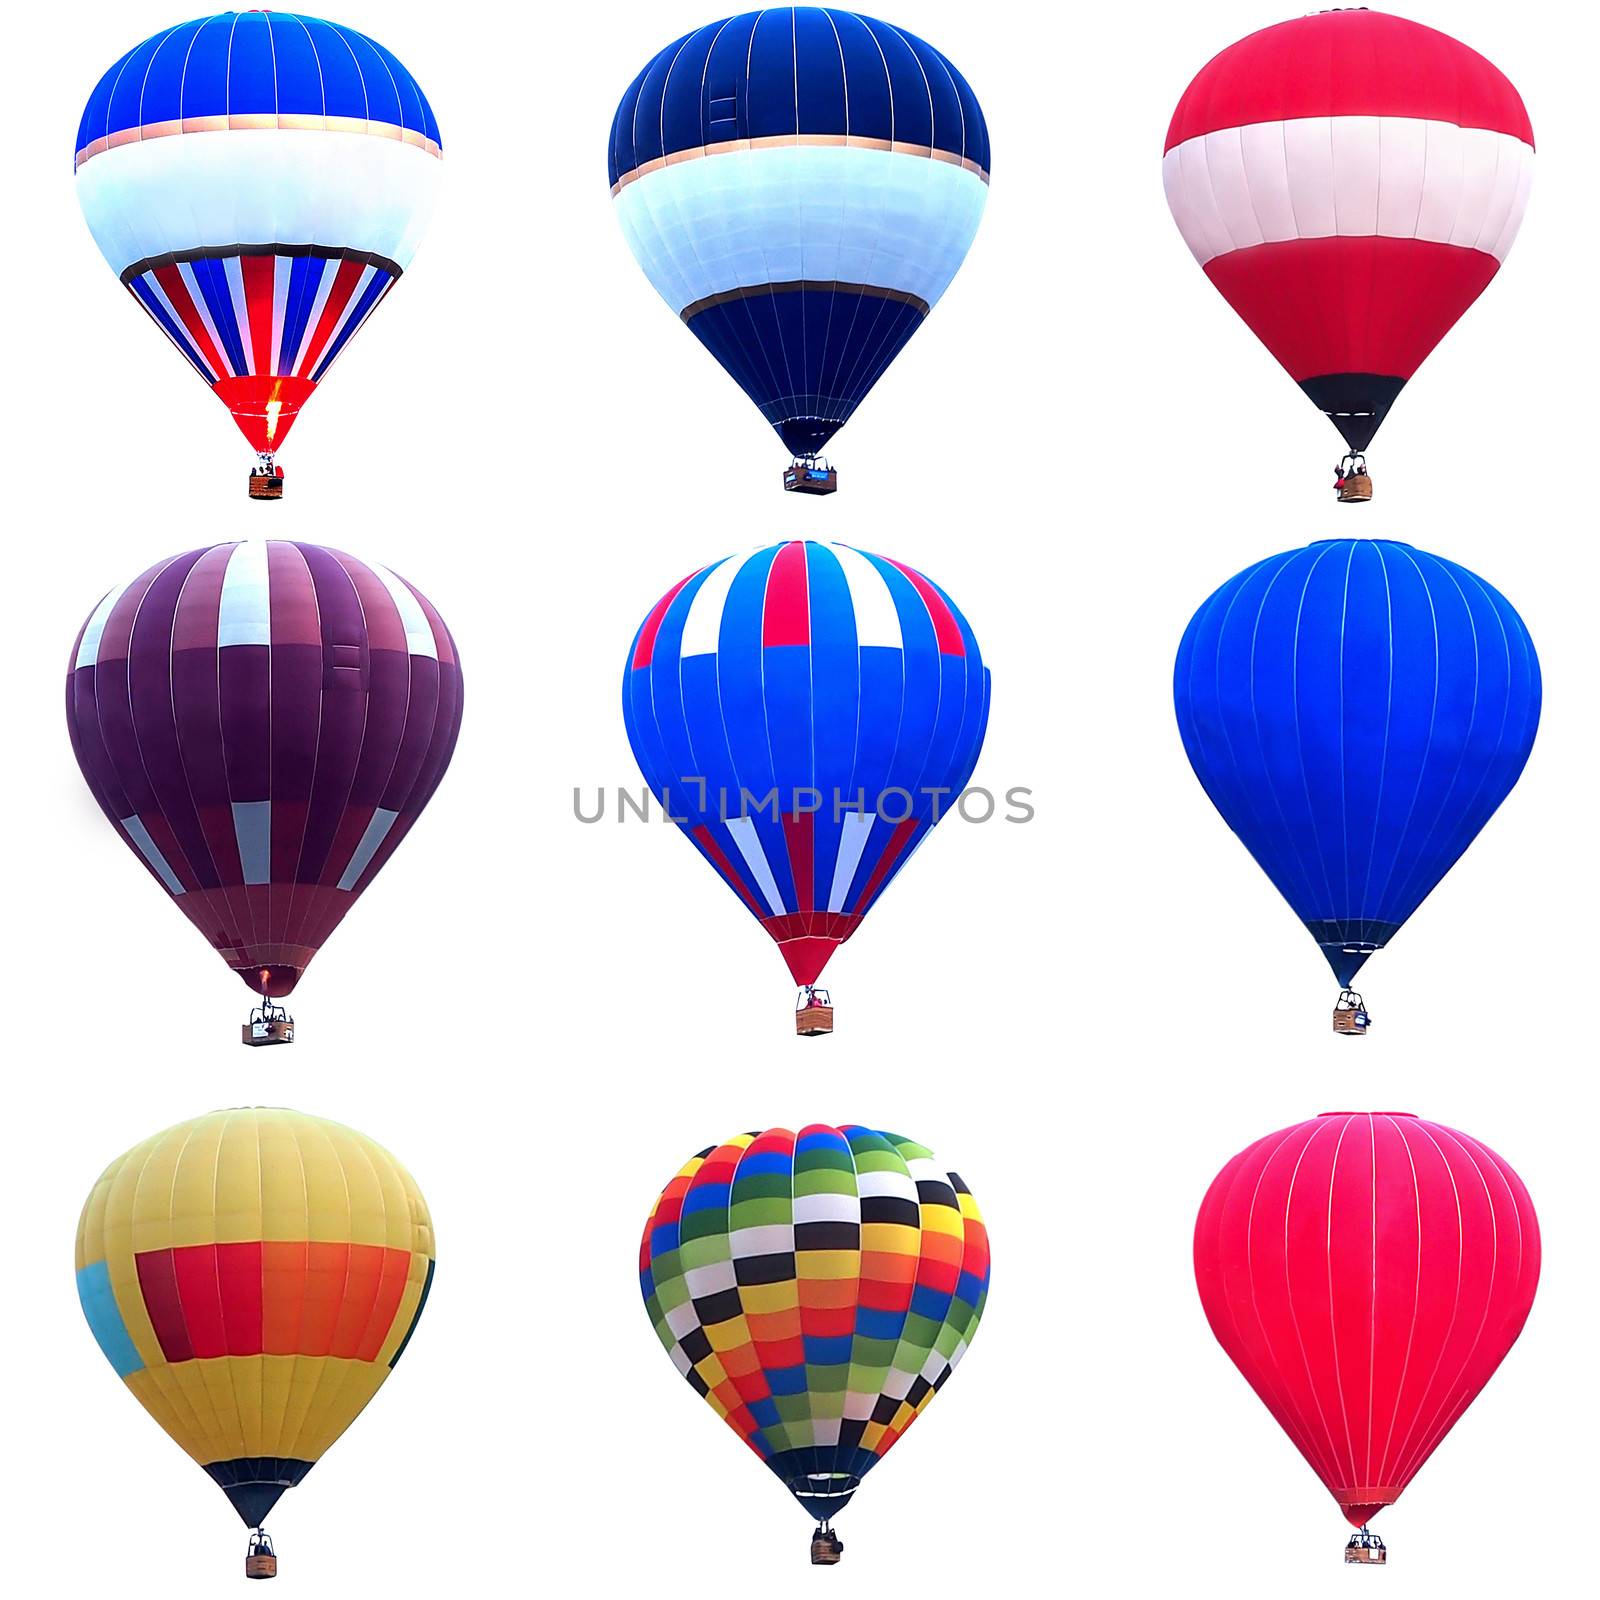 Hot air balloon collections by stockyimages